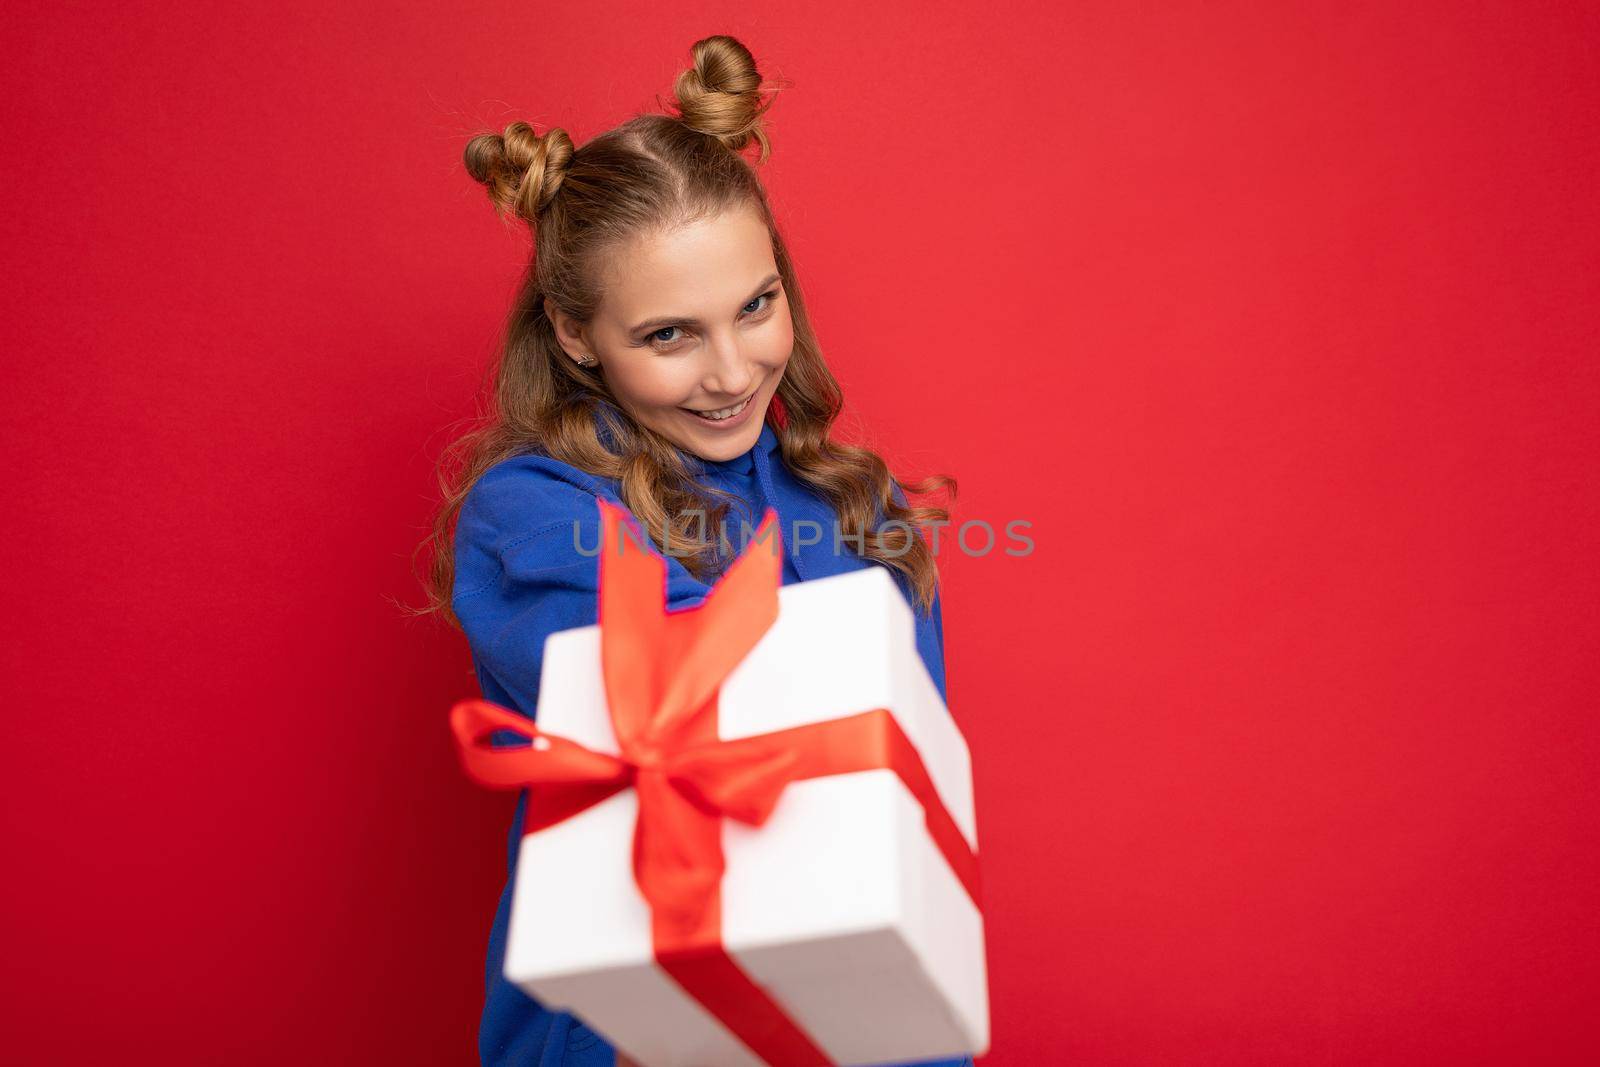 Charming happy funny joyful young blonde woman isolated over red background wall wearing blue trendy hoodie holding gift box and looking at camera.